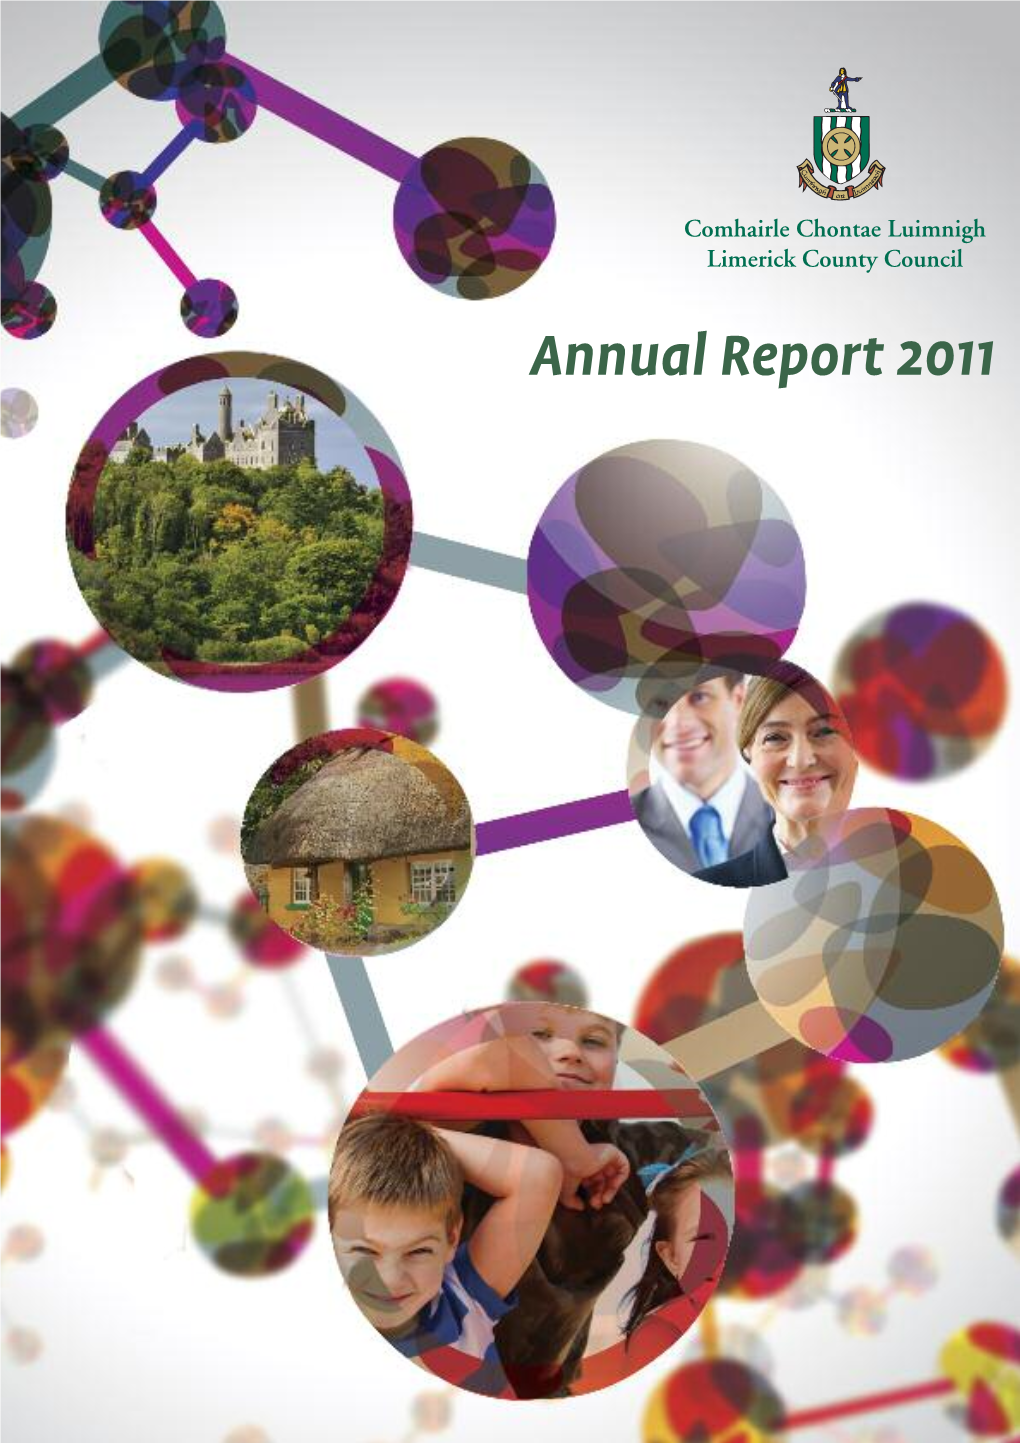 Annual Report 2011 Limerick County Council / Annual Report 2011